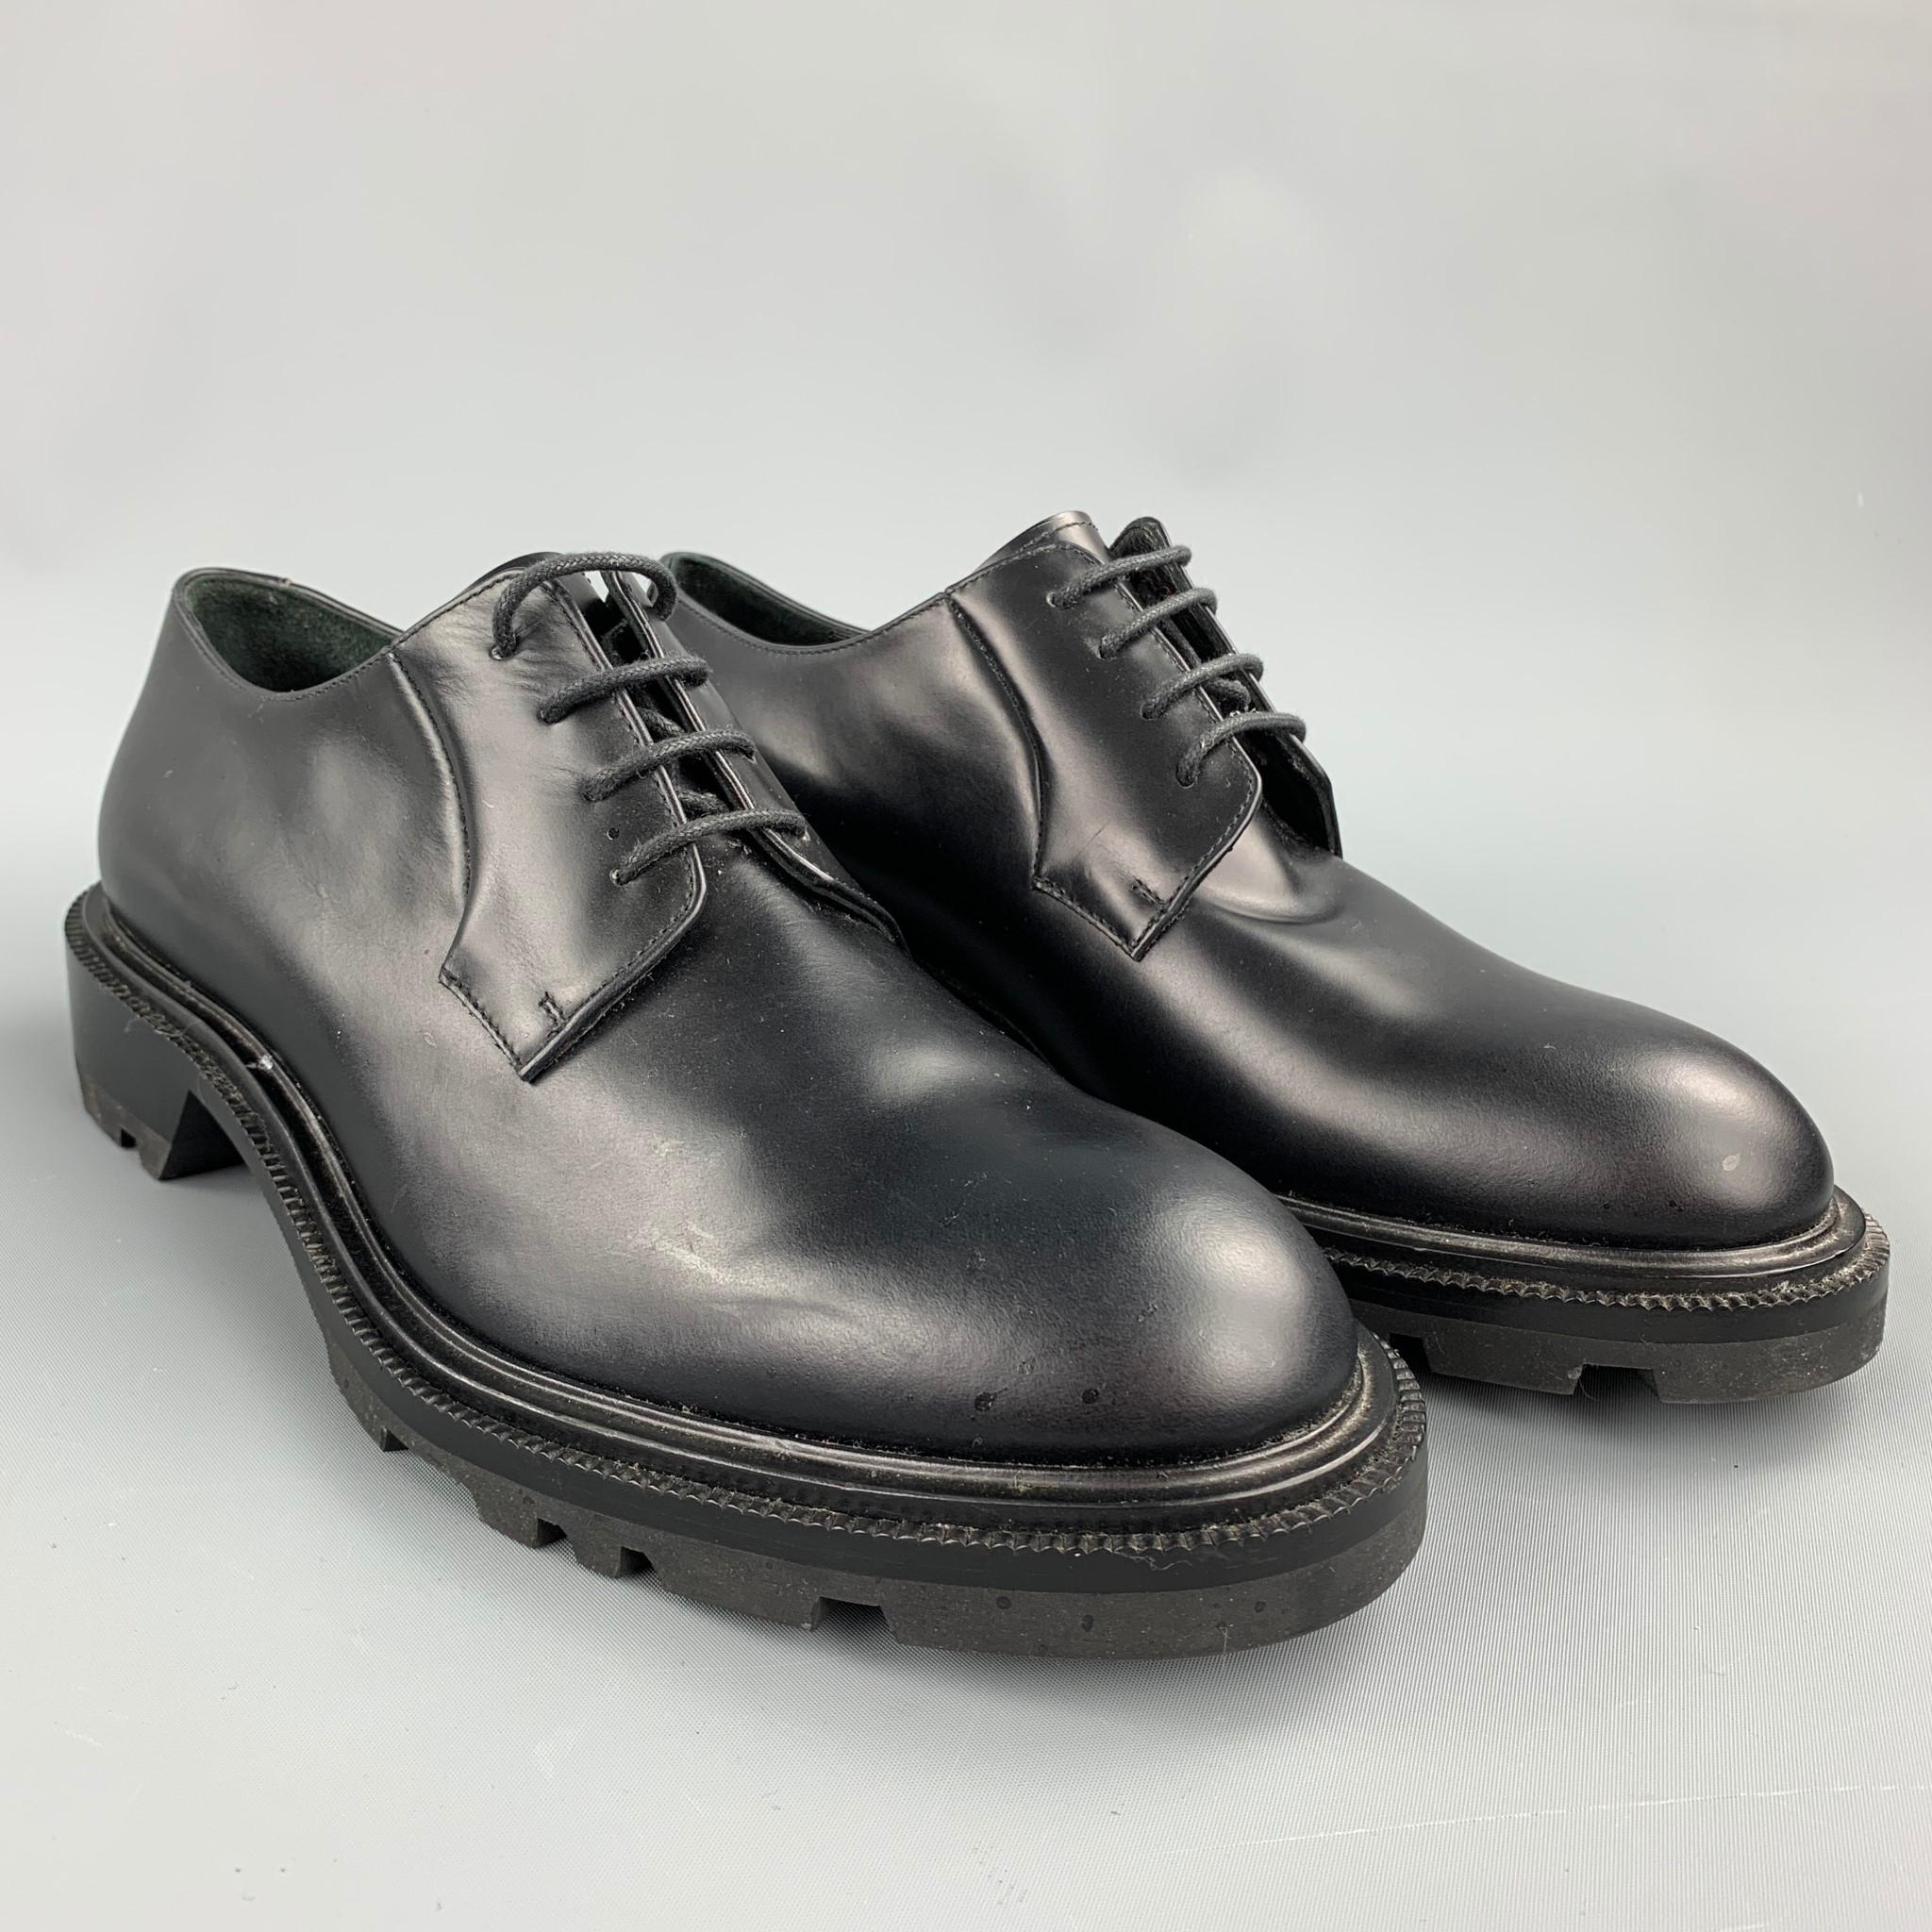 JIL SANDER shoes comes in a black leather featuring a cap toe, chunky sole design, and a lace up closure. Made in Italy.

Very Good Pre-Owned Condition.
Marked: EU 41

Outsole:

12 in. x 4 in.